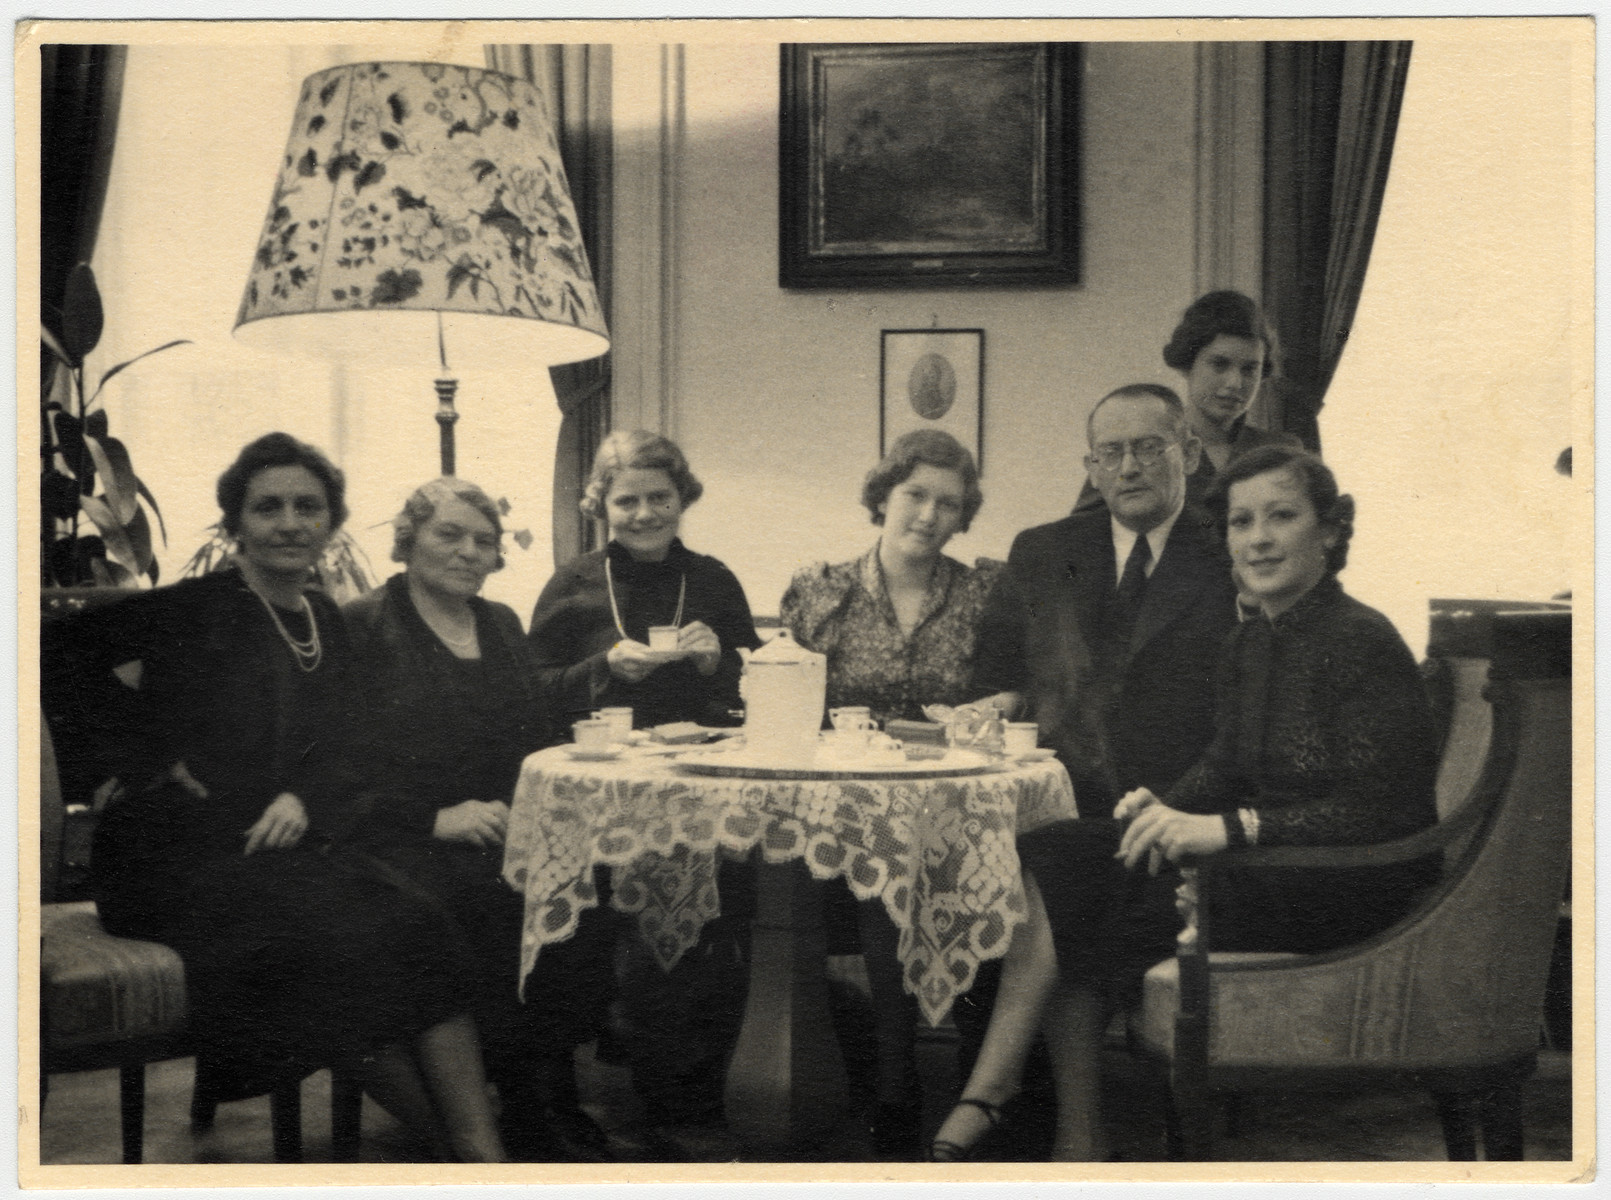 A Jewish family in Czechoslovakia poses by a table laden with coffee cups on the wedding day of their daughter, Lotte Aldor (the cousin of the donor).

Pictured from left to right are Marianne Aldor (the mother of the bride), Gusti Aldor, Emmy Aldor (sister of Marianne), Lotte Aldor, Robert Ayer, Mimi (Lotte's sister) and unidentified.